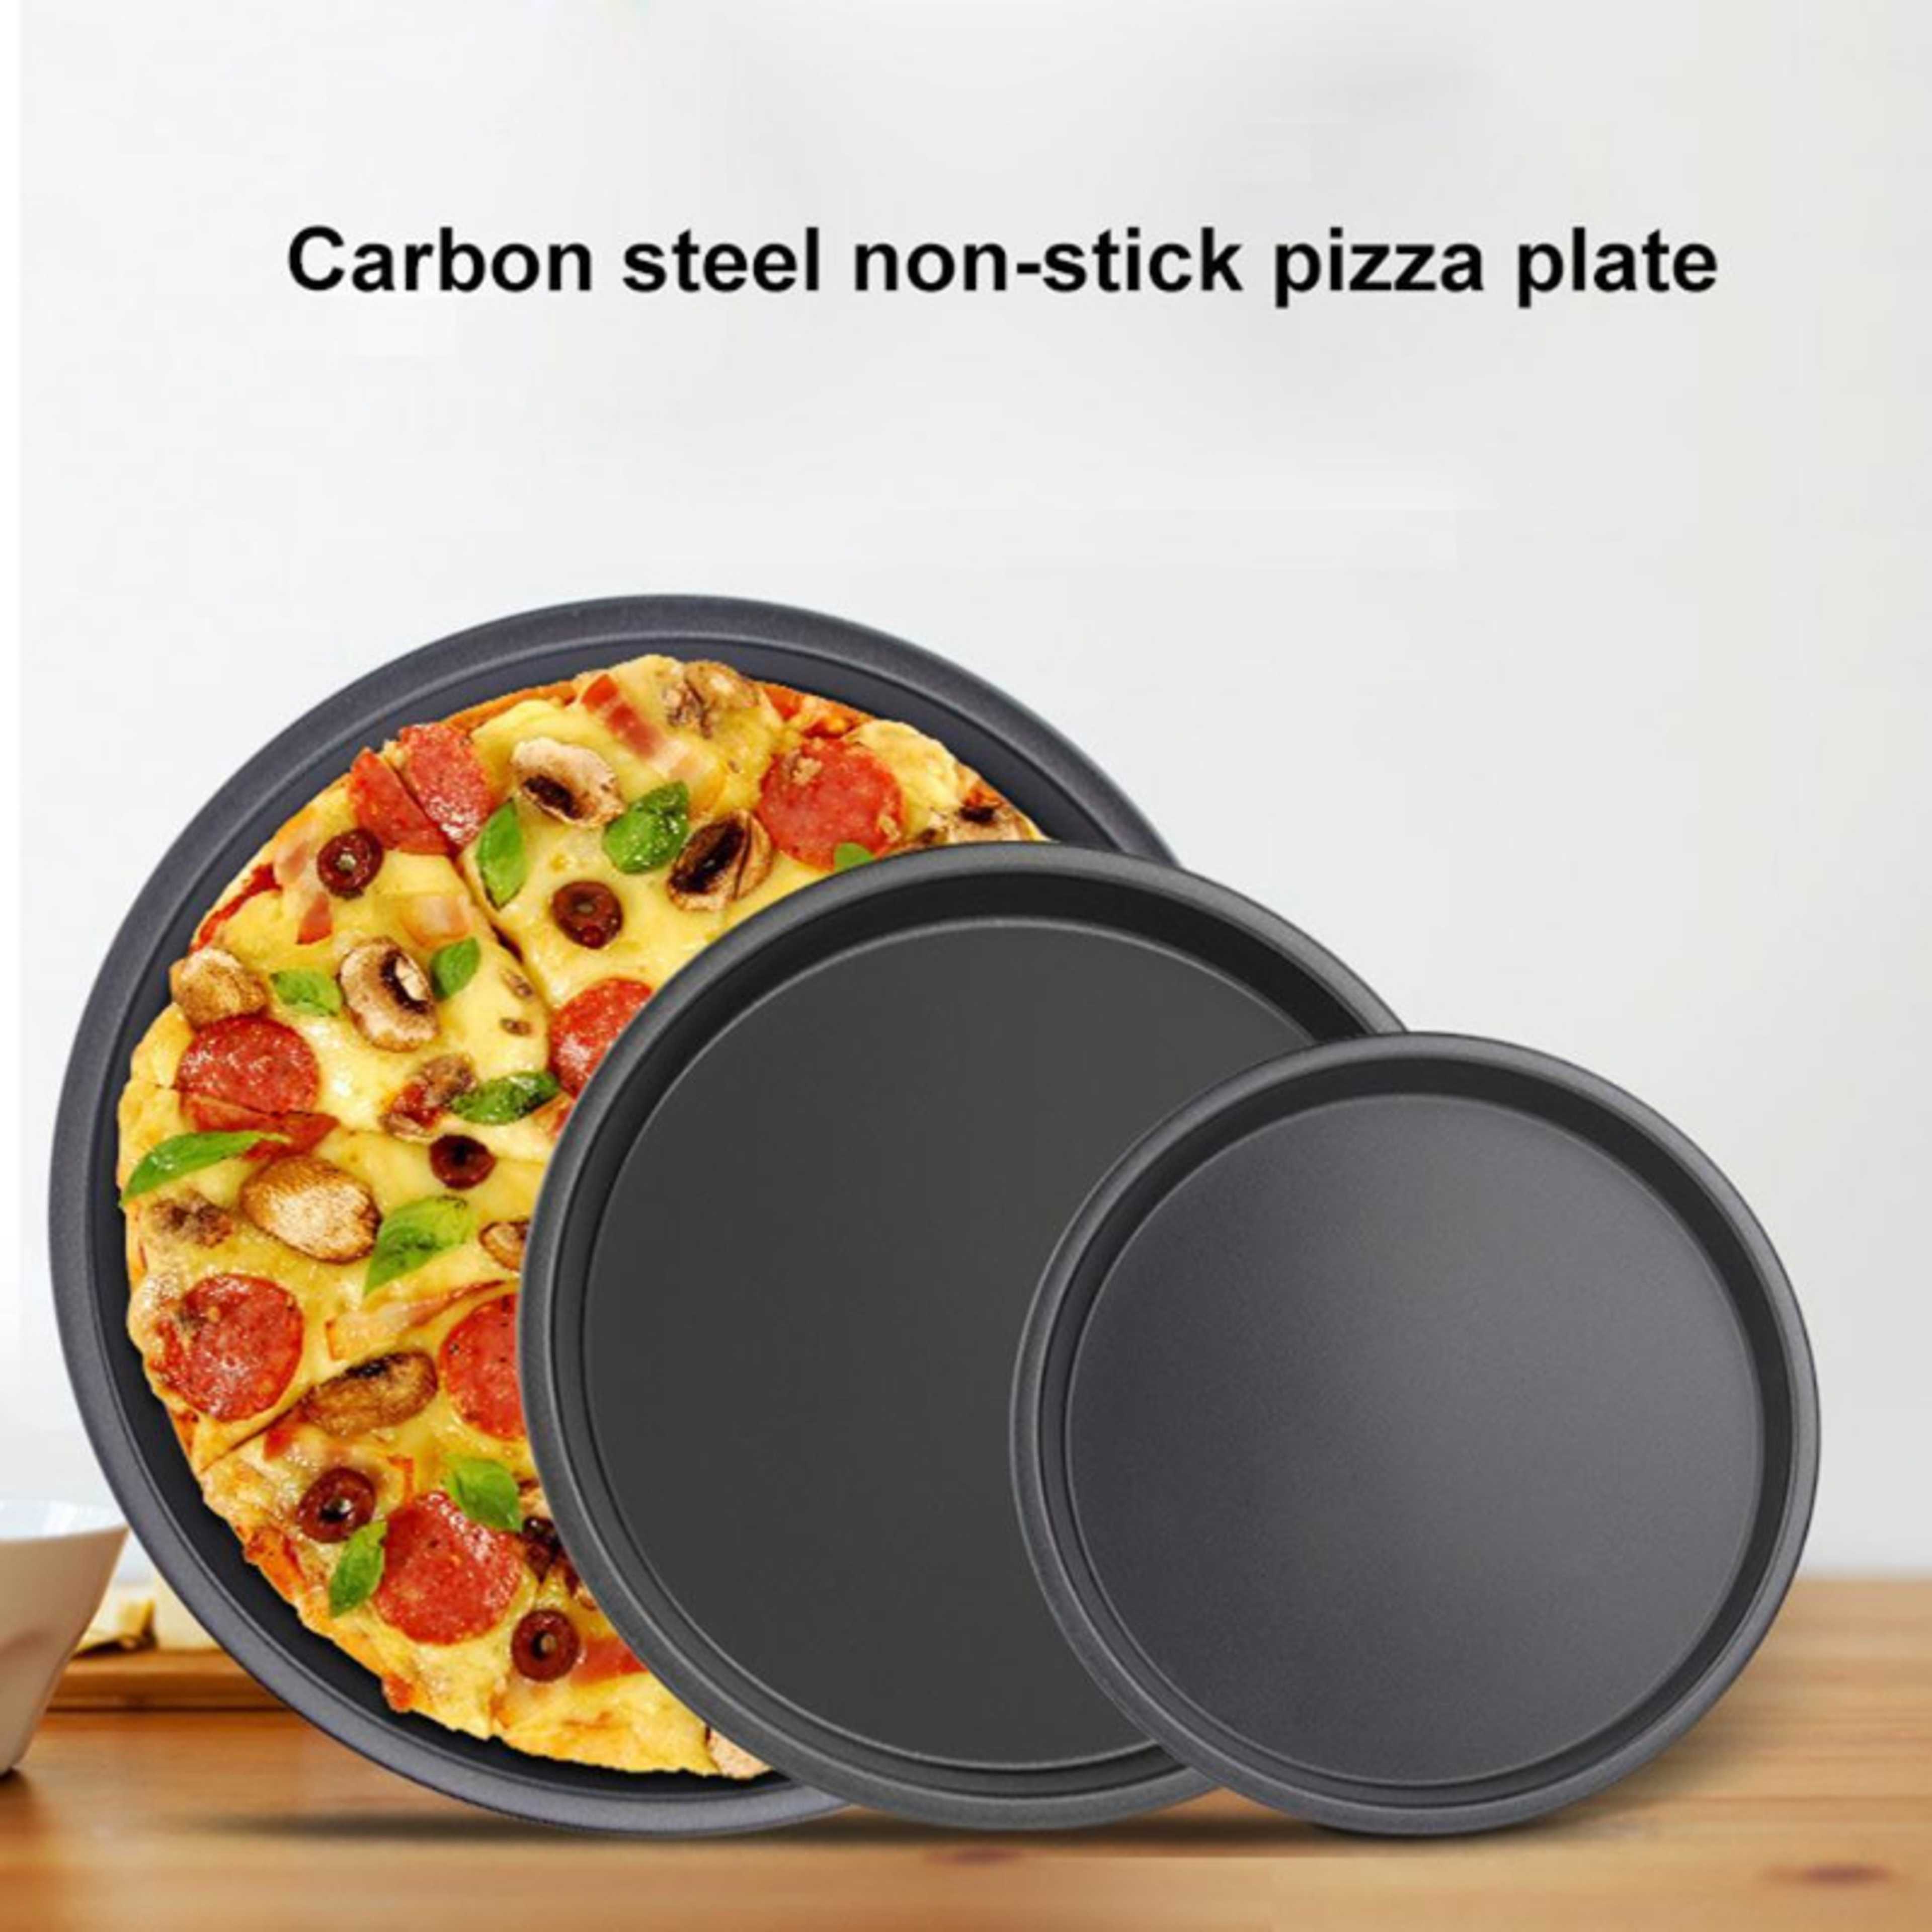 Pack of 3 Non-stick Pizza Pan, Round Premium Bakeware, Black Easy Baking Plate Pan Cook Pizza Pizza Pan Set Nonstick Pizza Pan Set Durable, high quality non stick coating High Temperature Resistance Multifunctional(BBS094)